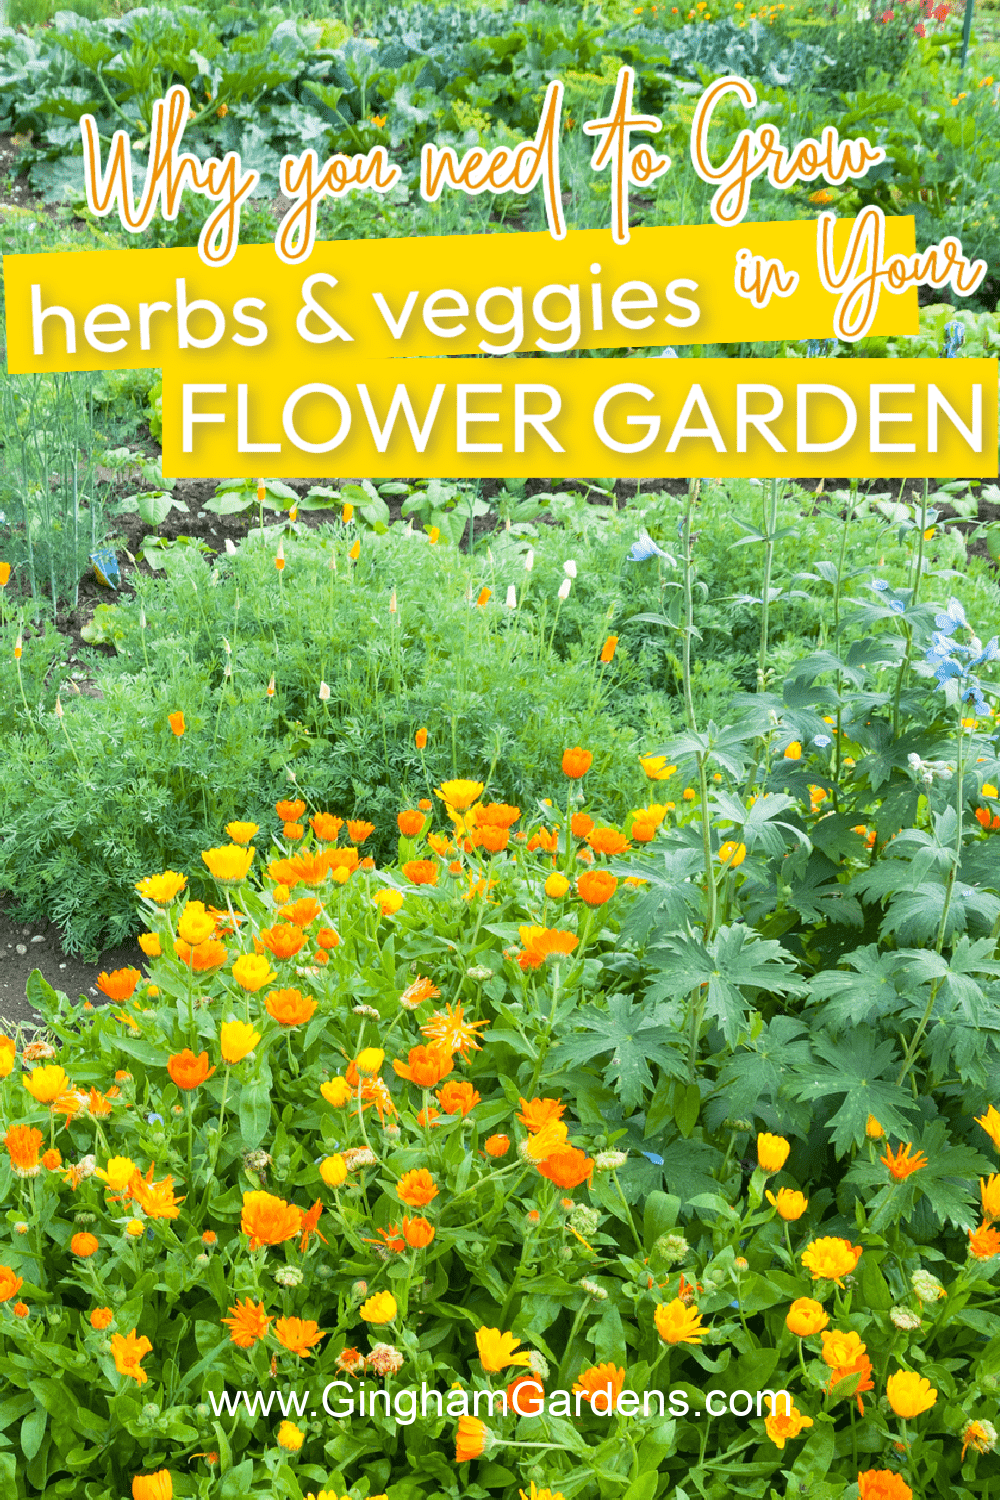 Flower and Vegetable garden with text overlay- Why you should add herbs and veggies to your flower garden